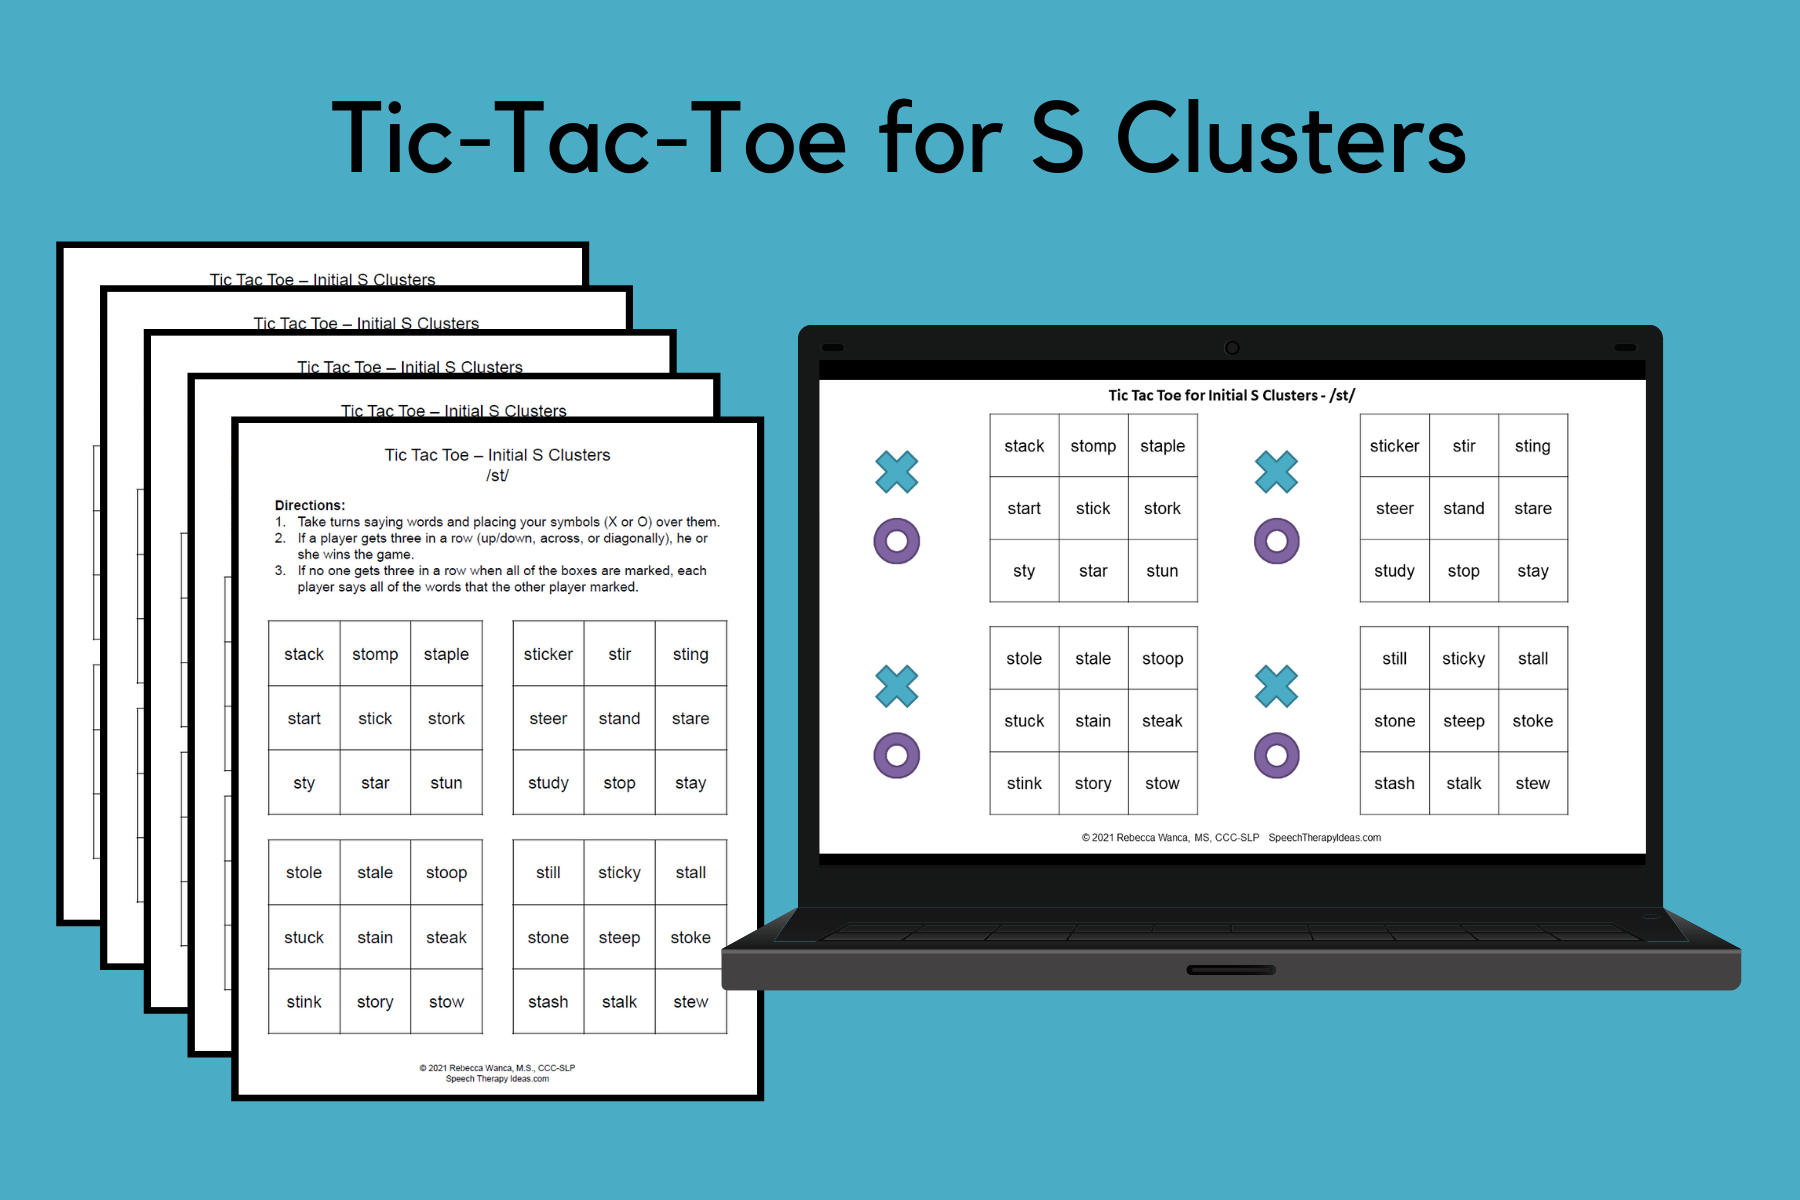 Tic-Tac-Toe Games for Initial S Clusters